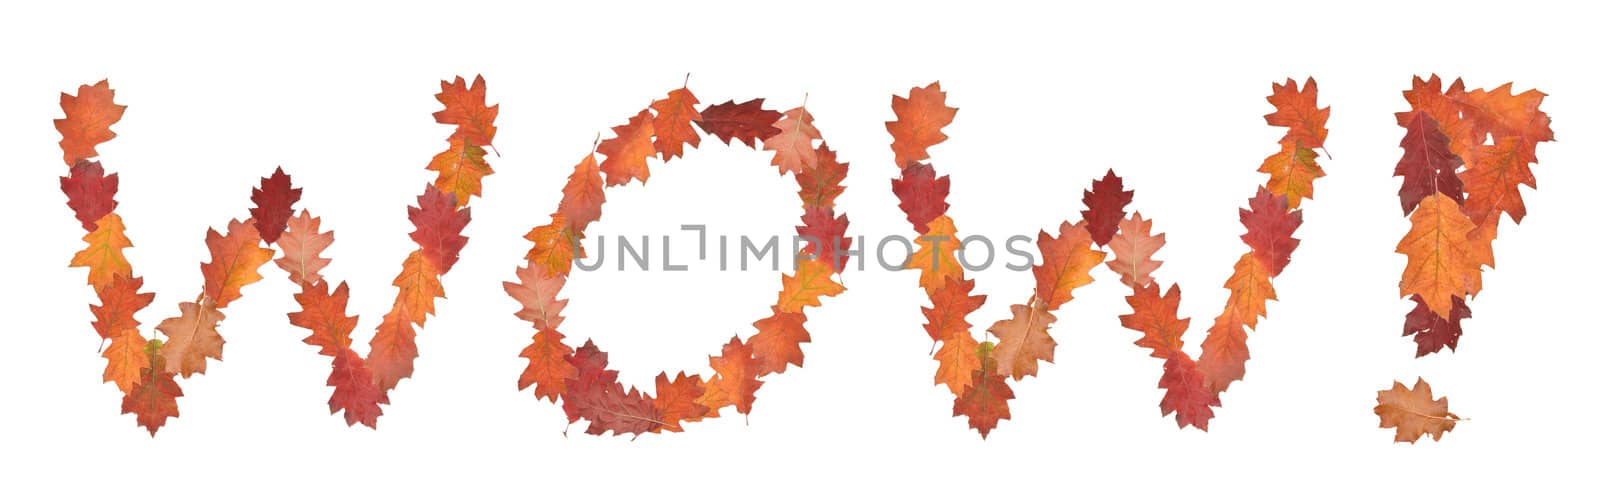 word wow made of autumn leaves by merzavka